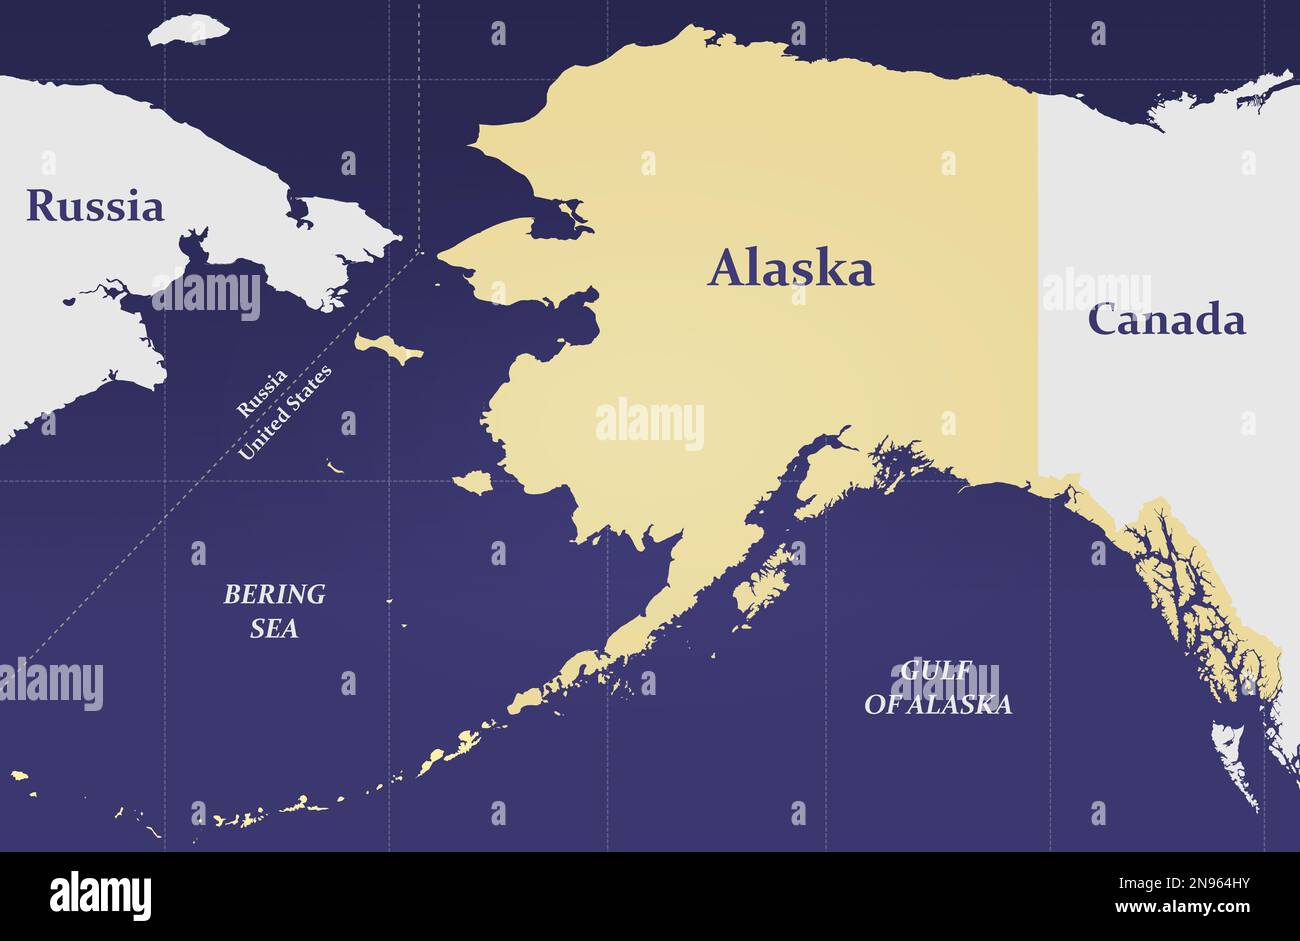 Russia Alaska Map - Simple Map Depicting the Maritime Boundary Between Alaska and Russia and the Alaska Canada Border - Alaska and the North Pacific Stock Photo